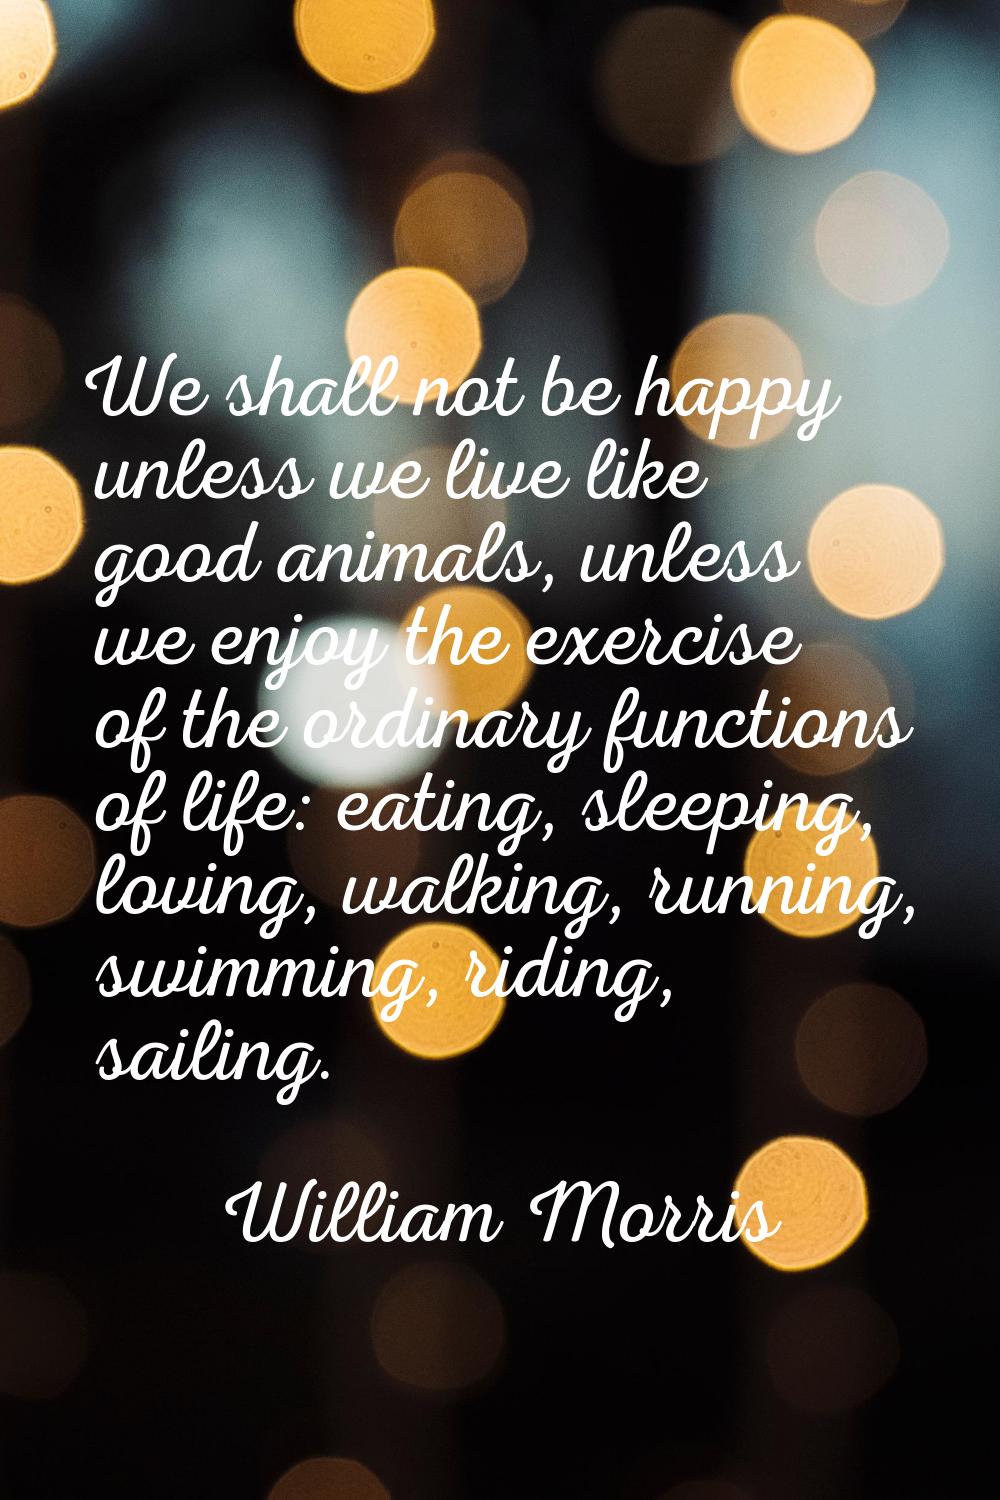 We shall not be happy unless we live like good animals, unless we enjoy the exercise of the ordinar